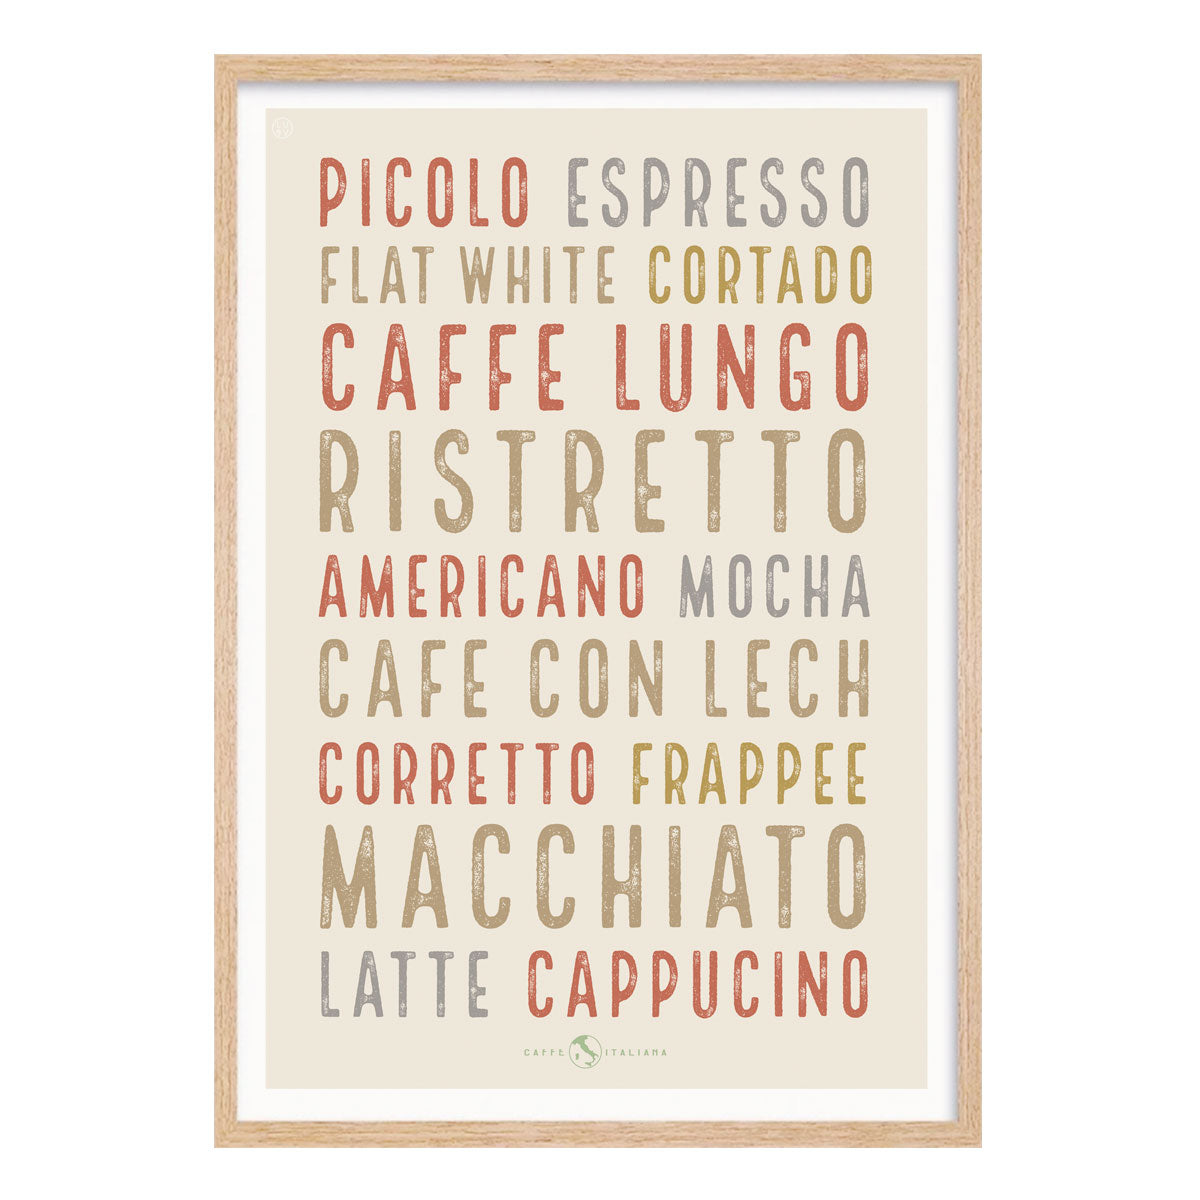 Retro vintage light Italian Coffee poster print in oak frame from Places We Luv